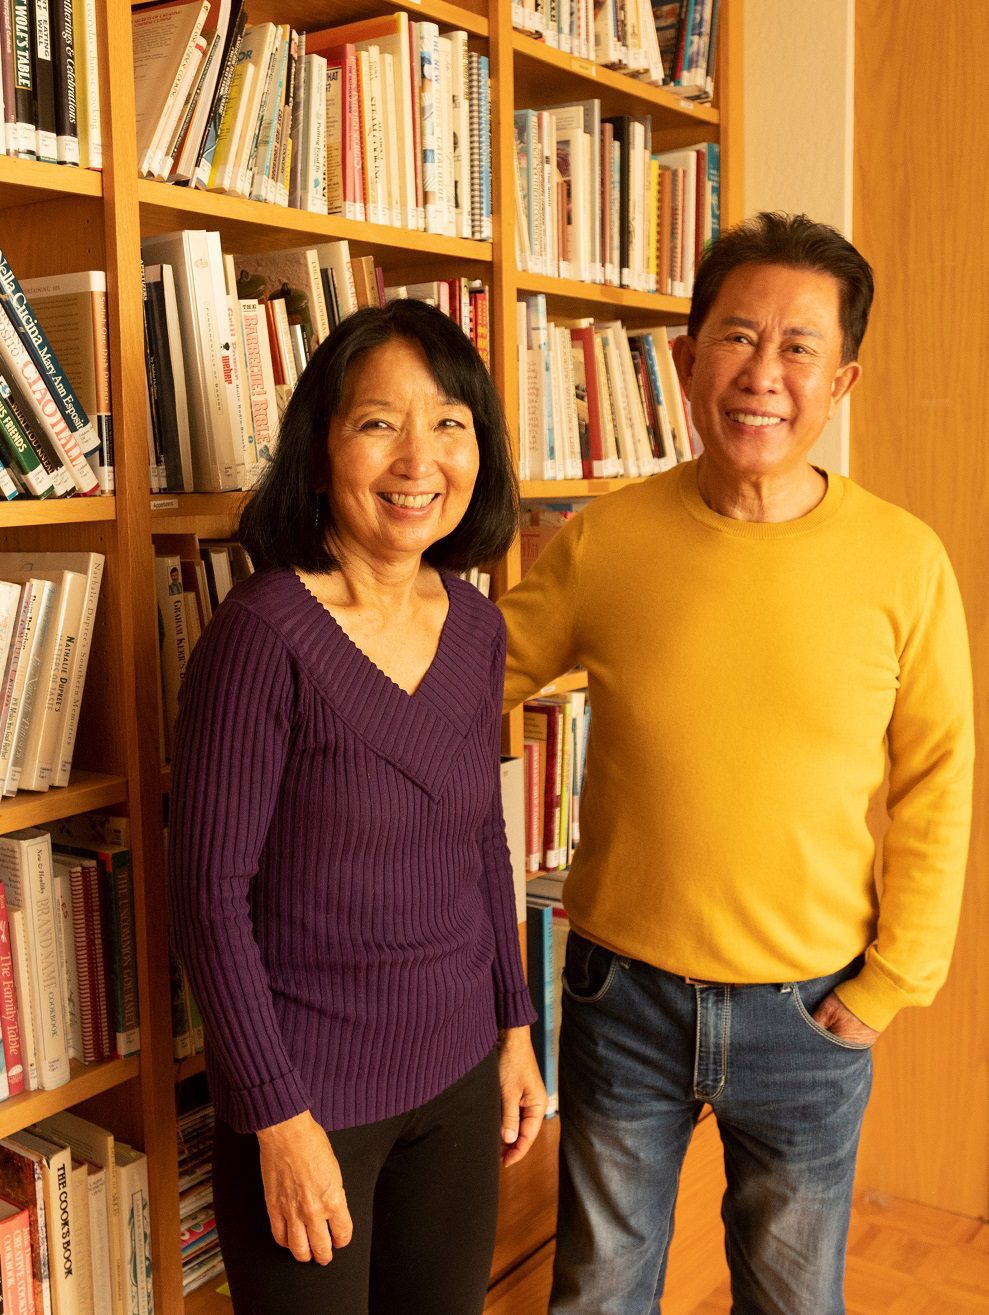 Susan and Martin Yan at their home in front of bookshelves holding many of the cookbooks donated to the UC Davis Library